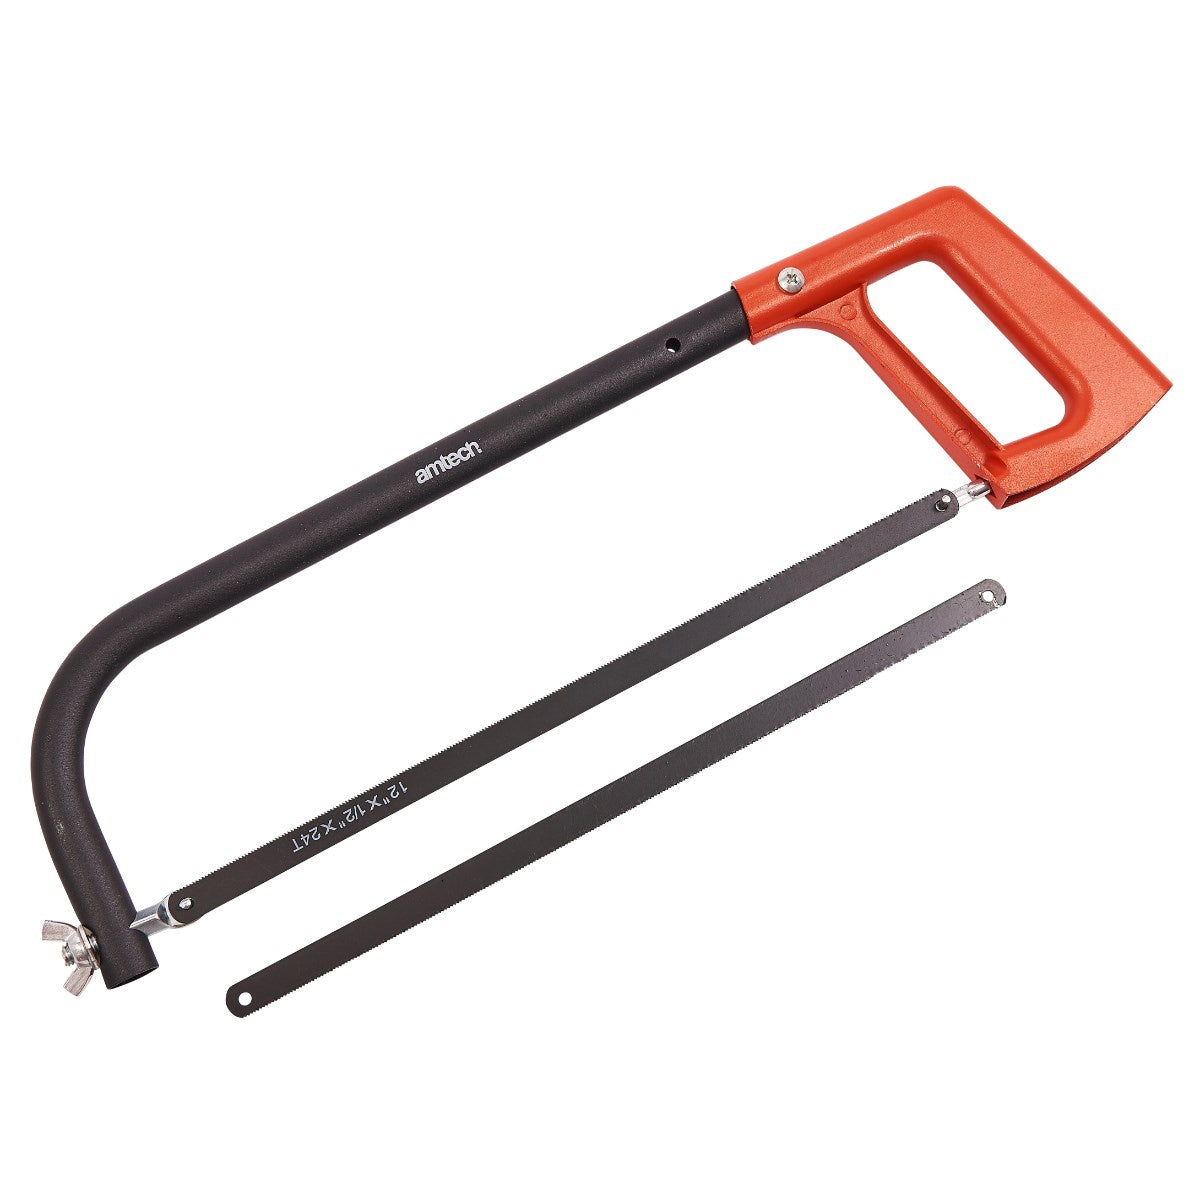 Amtech M0700 Adjustable Hacksaw 12" with 2 Blades - Premium Hacksaws from DK Tools - Just $4.99! Shop now at W Hurst & Son (IW) Ltd